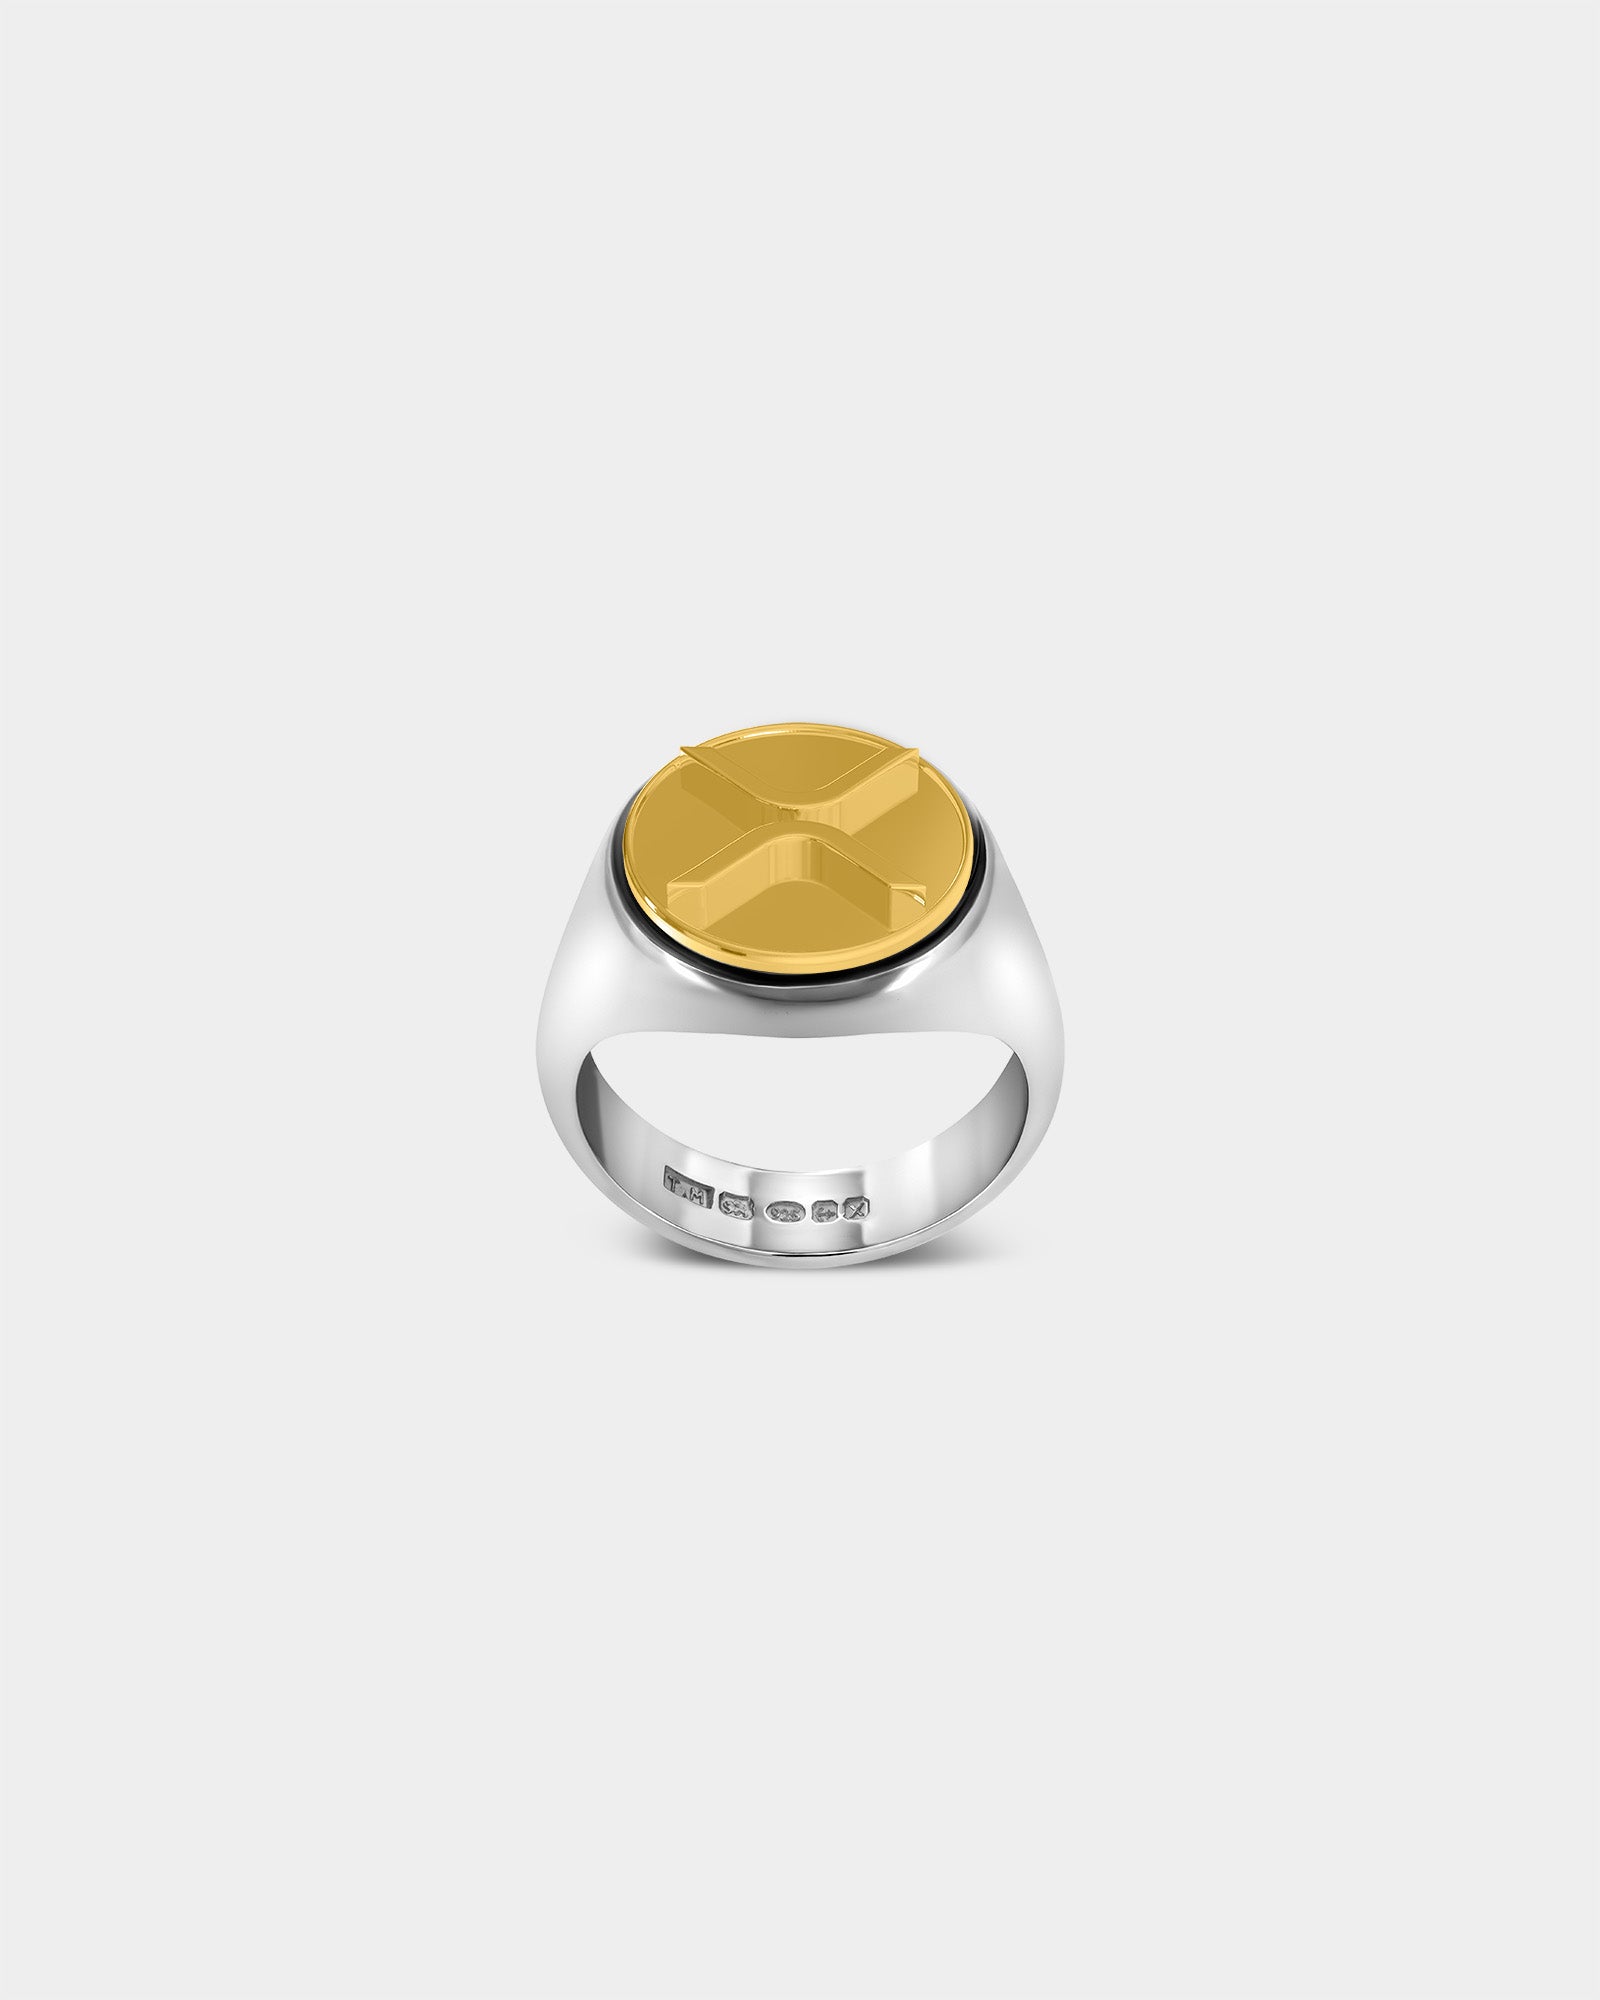 Large Ripple XRP Crypto Ring in Sterling Silver / 9k Yellow Gold by Wilson Grant